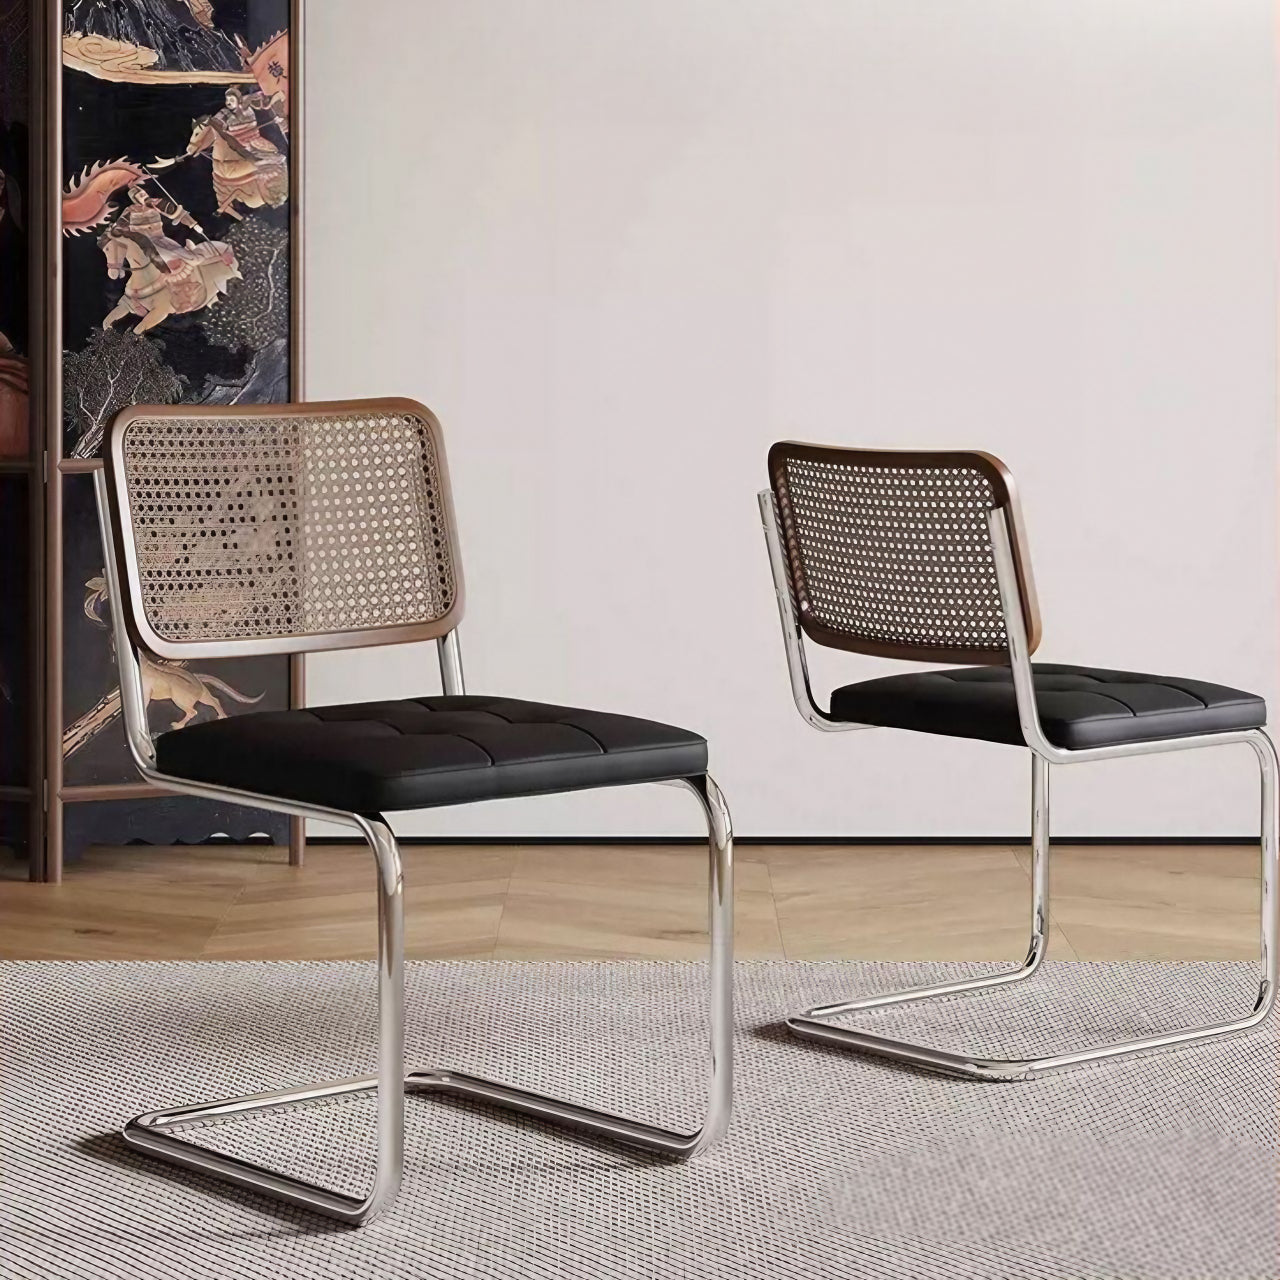 Elegant single retro chair with black PU leather and rattan design